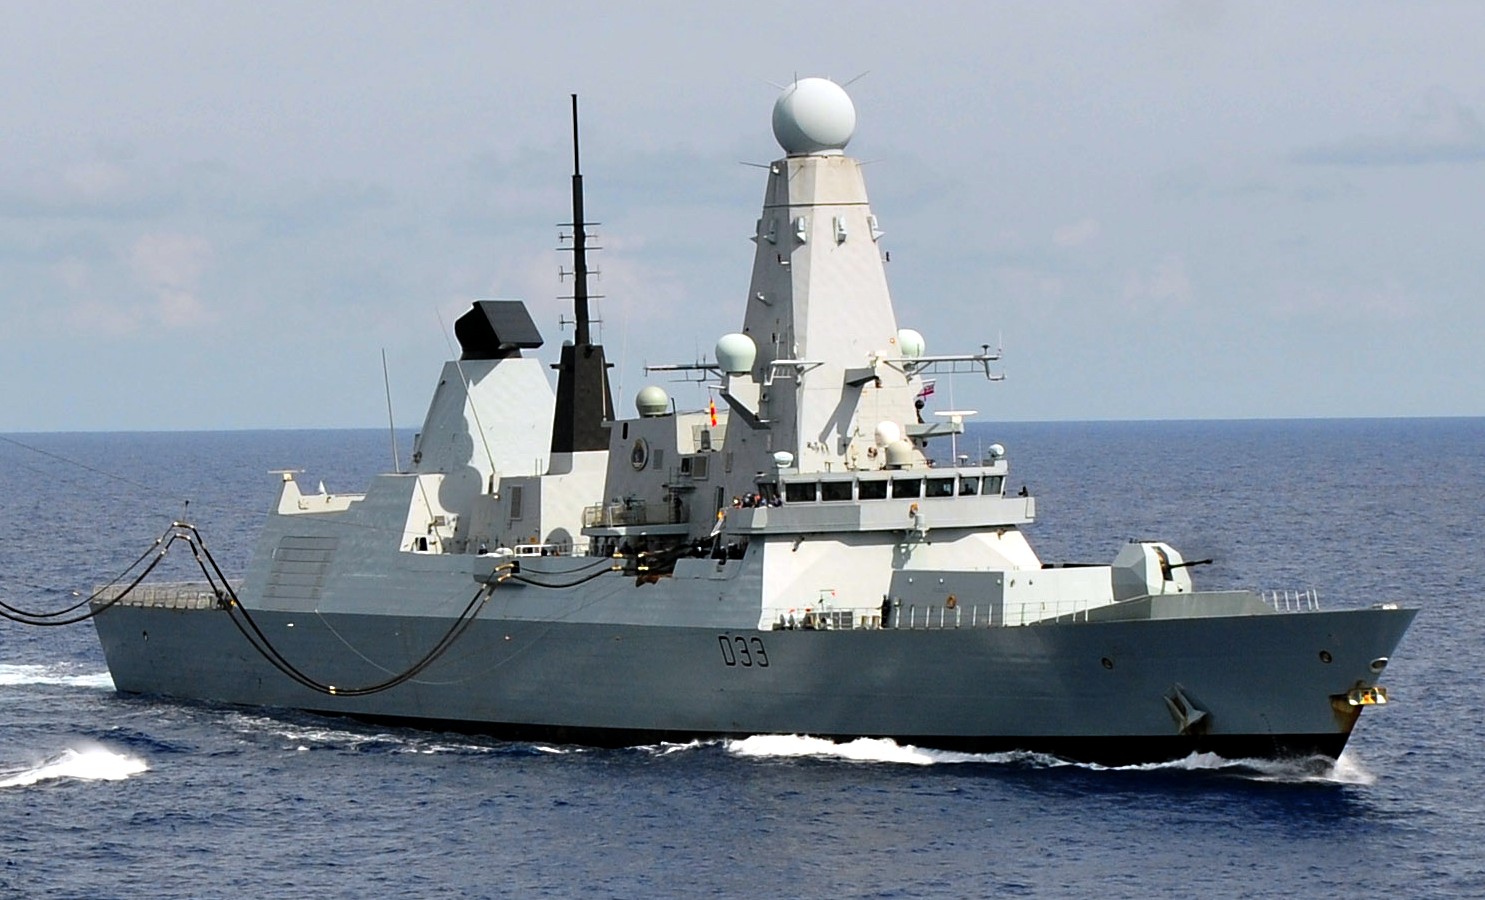 hms dauntless d-33 type 45 daring class guided missile destroyer royal navy sea viper paams 03